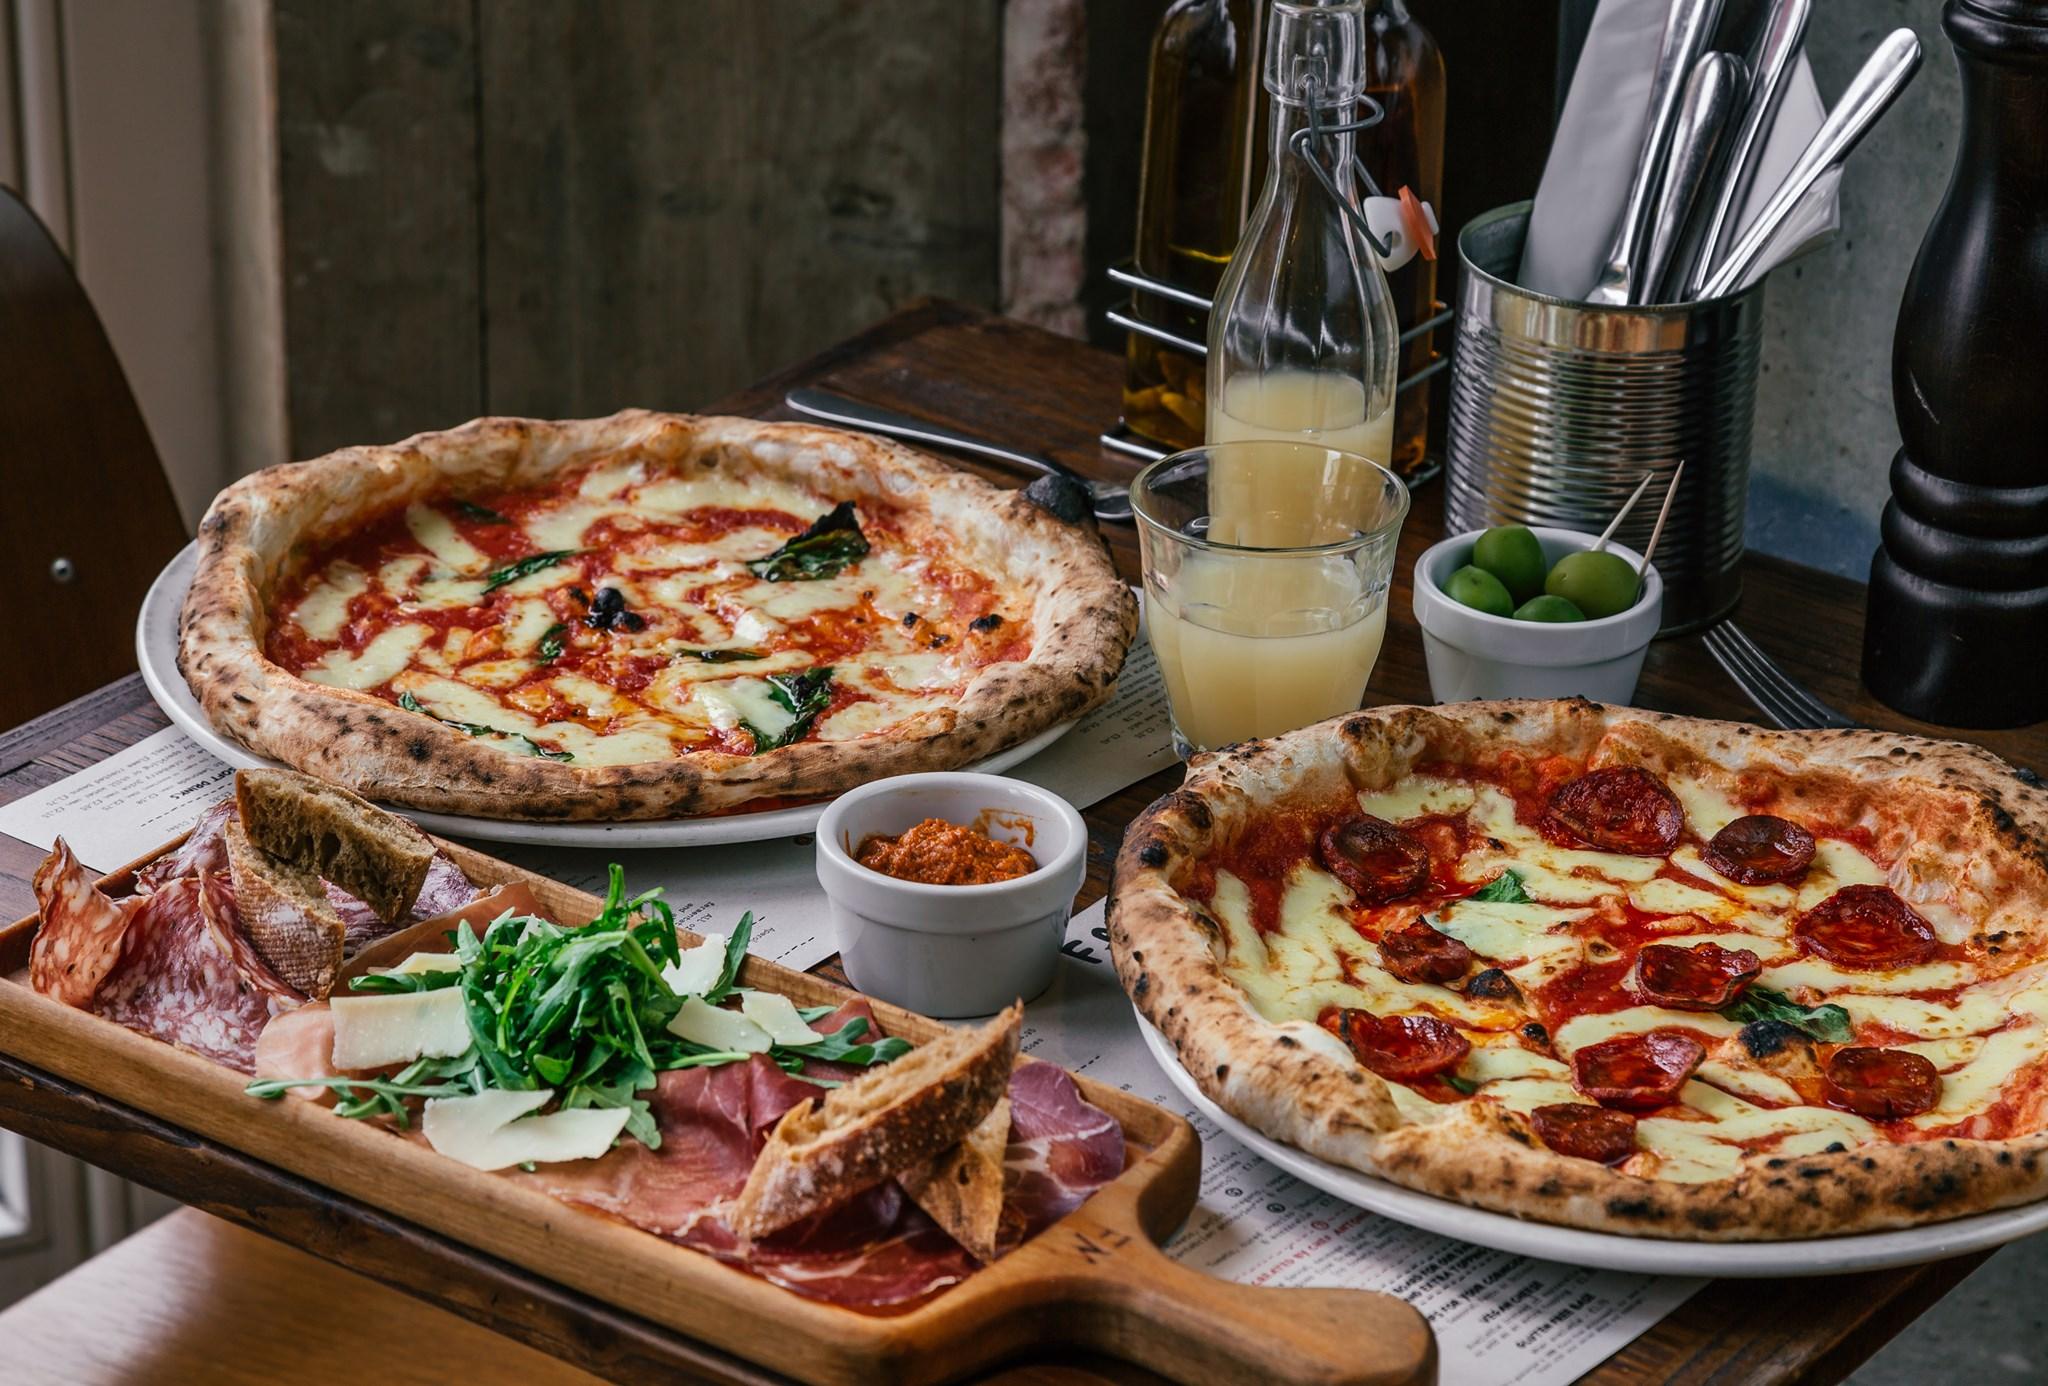 Pizza & Soft Drink for £9.95 Student Discount at Franco Manca